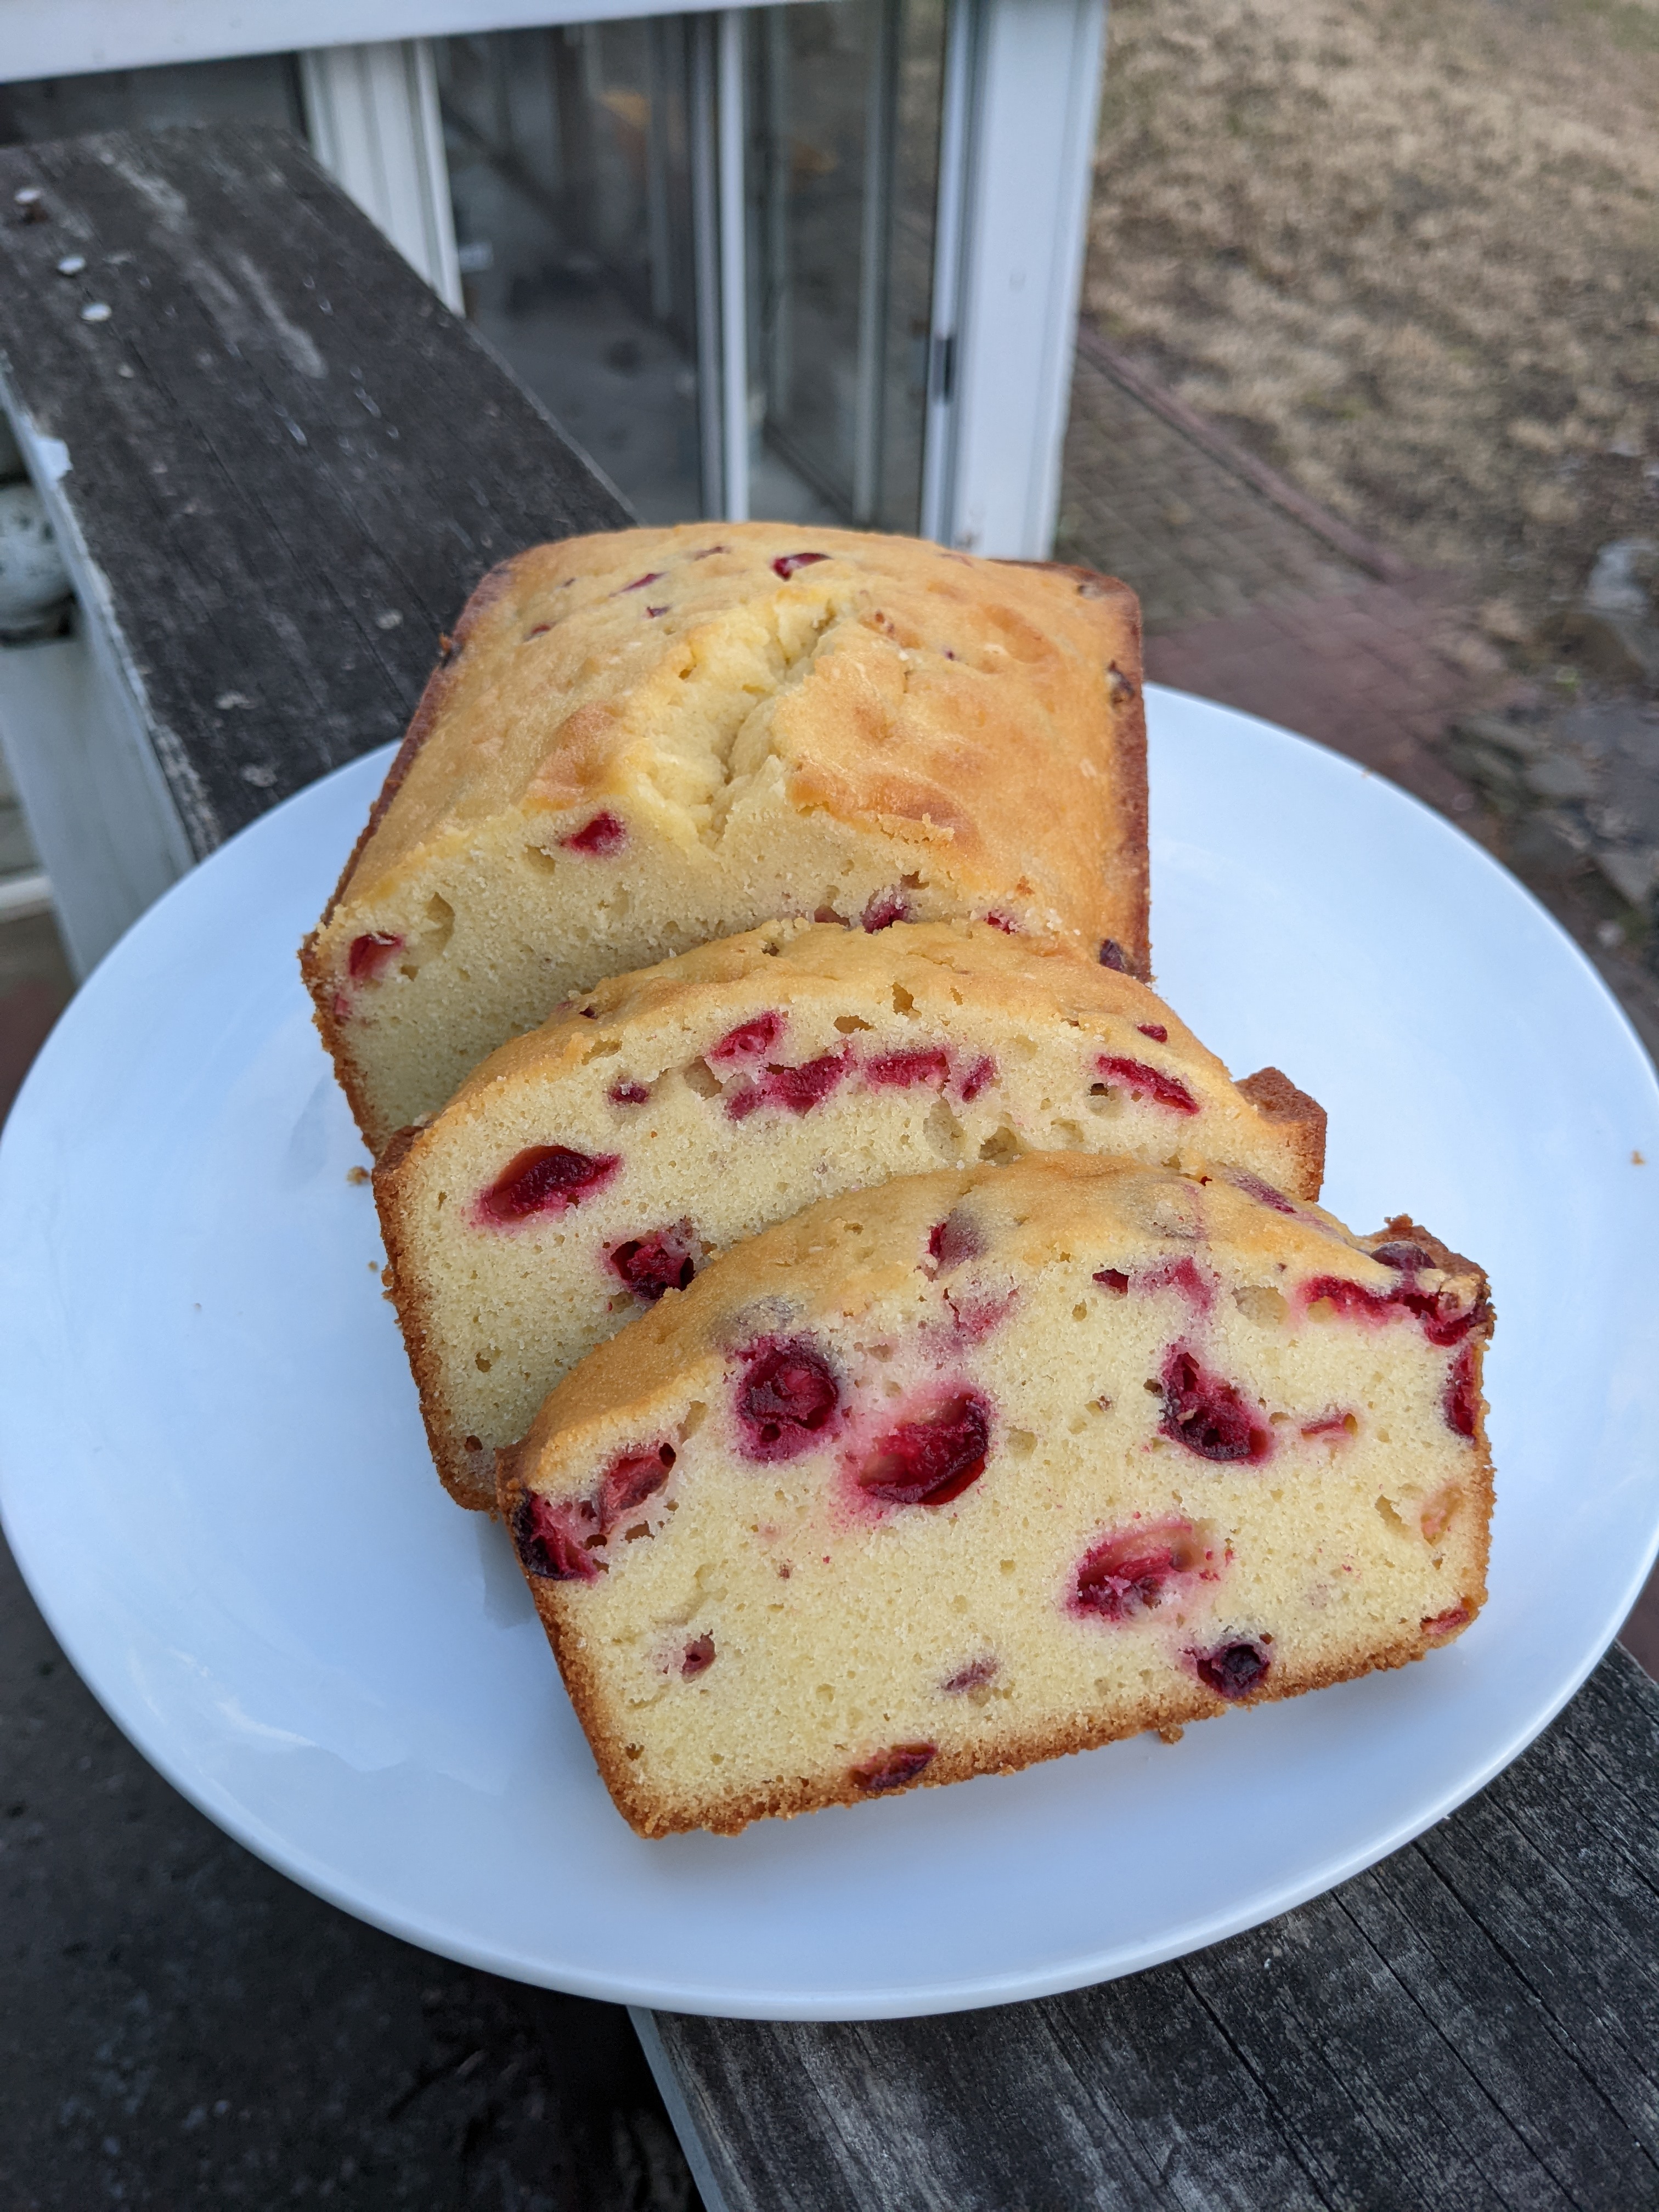 A loaf and two slices of pound cake dotted with red cranberries.